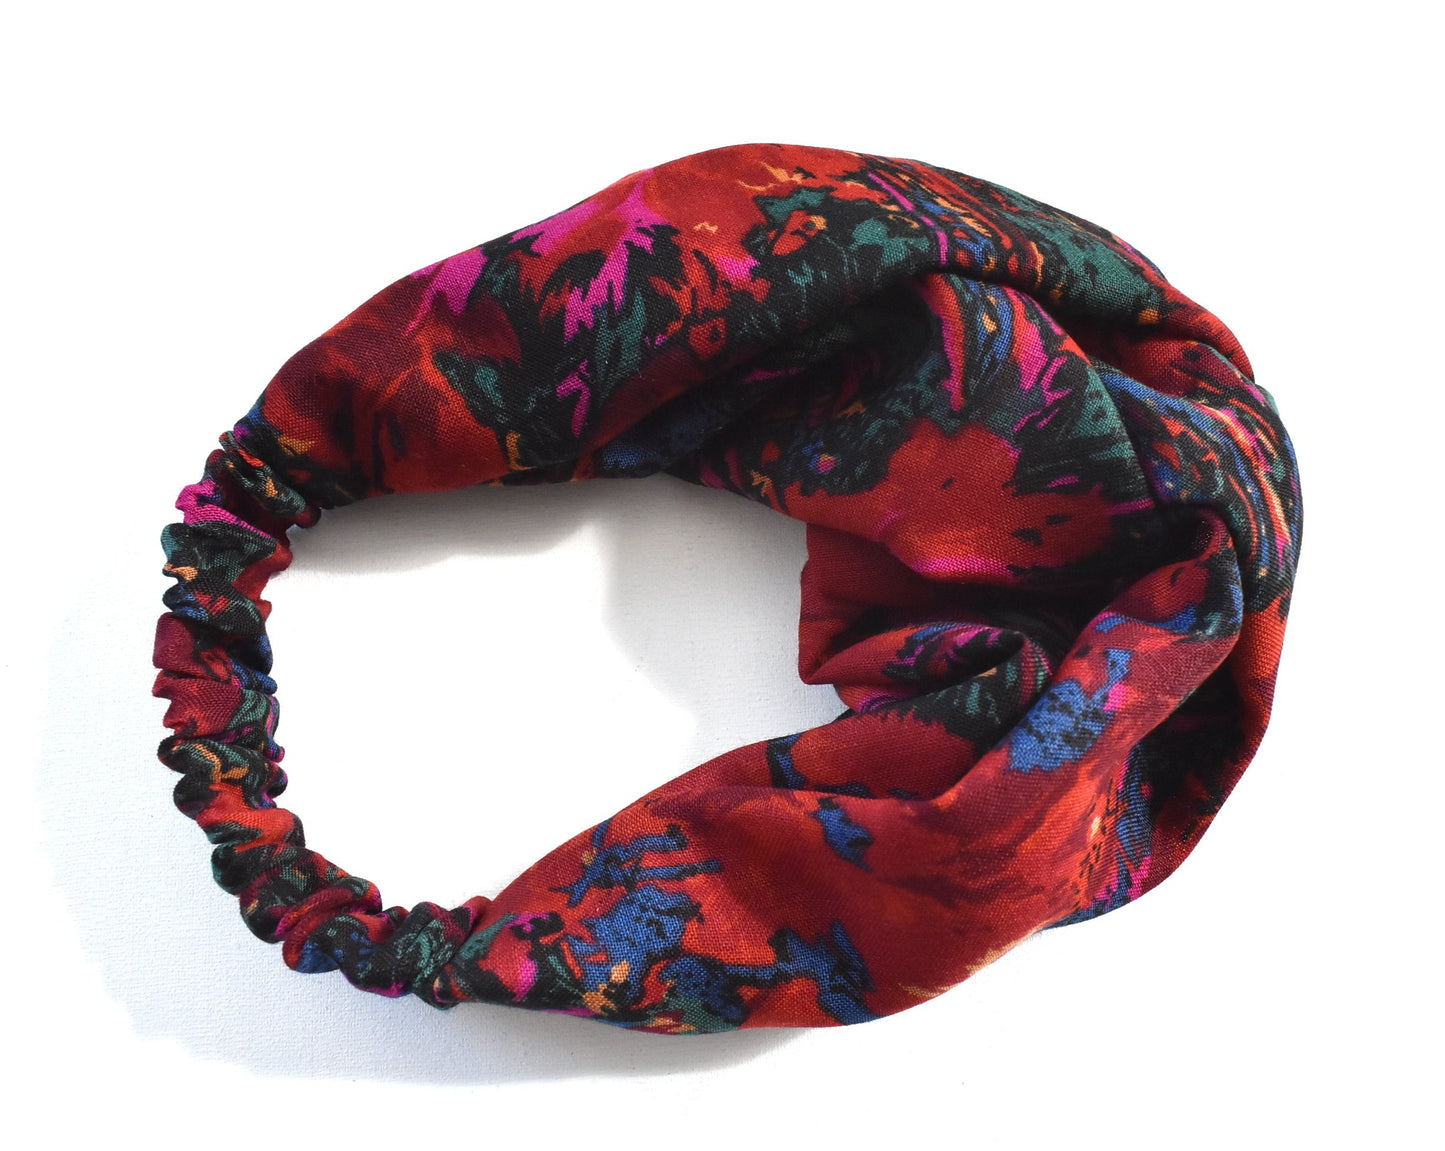 Twisted Turban hairband - Bright Abstract Floral - in Vintage Liberty of London Varuna wool